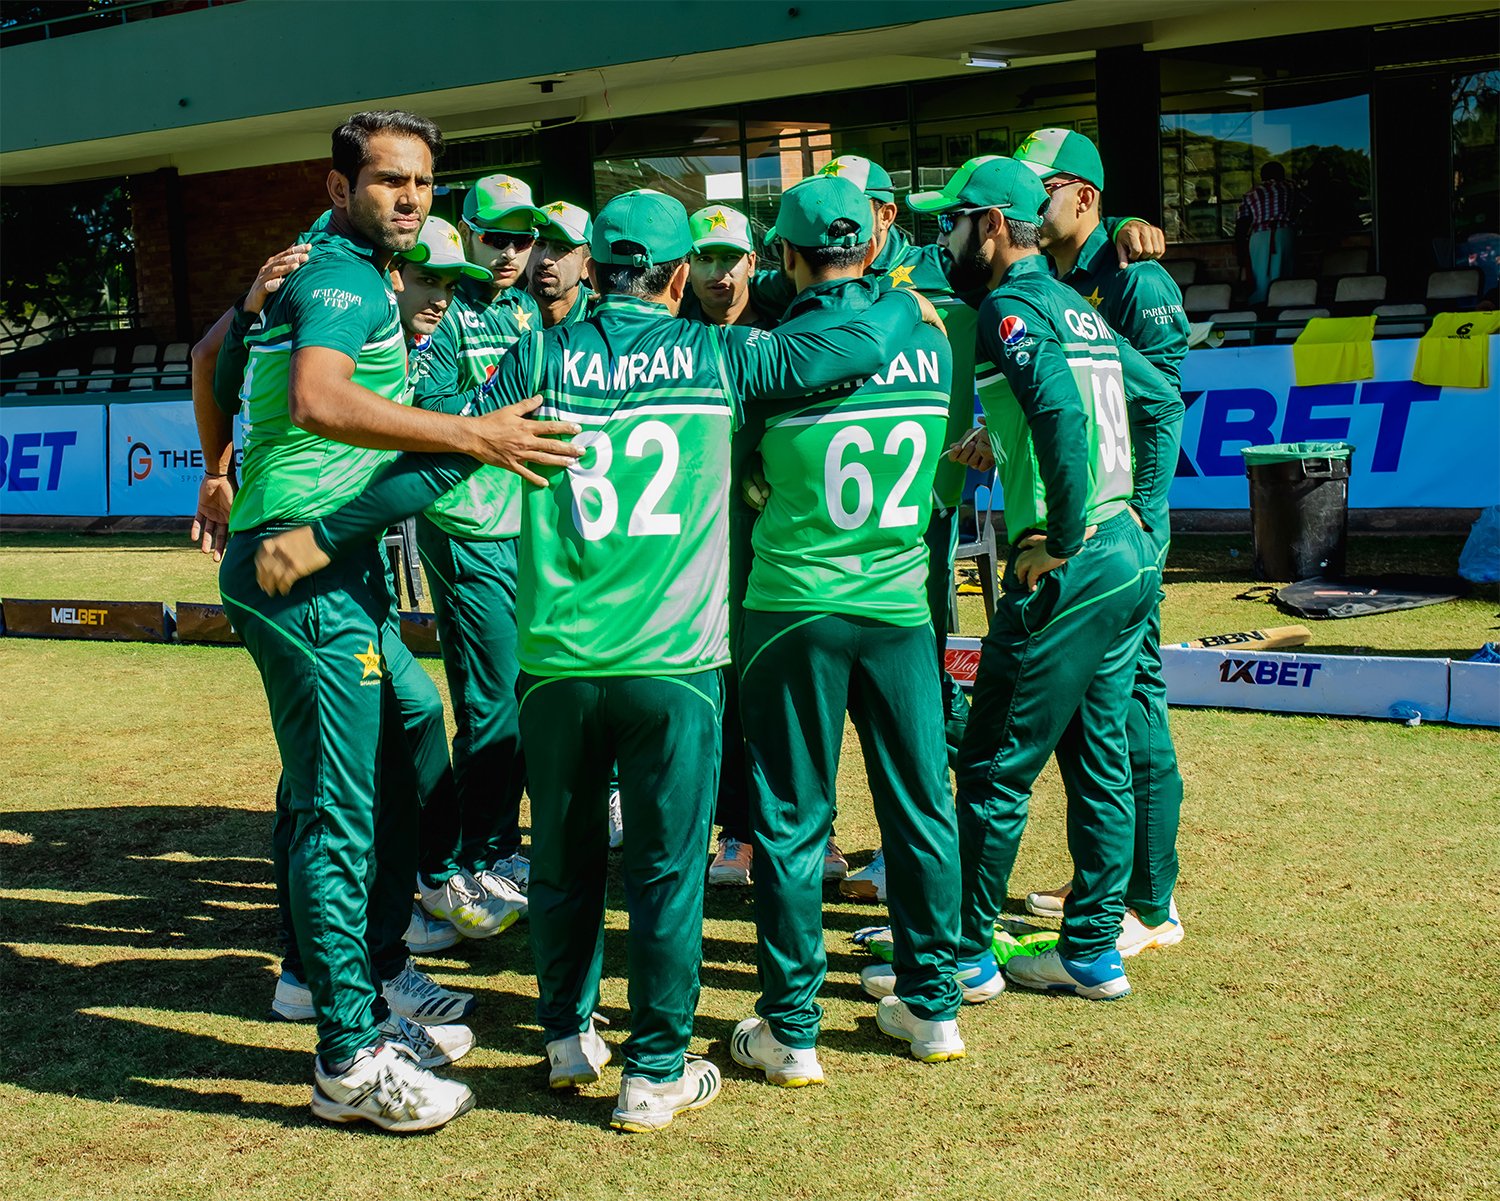 pakistan shaheens penalized five runs for ball tampering against zimbabwe select